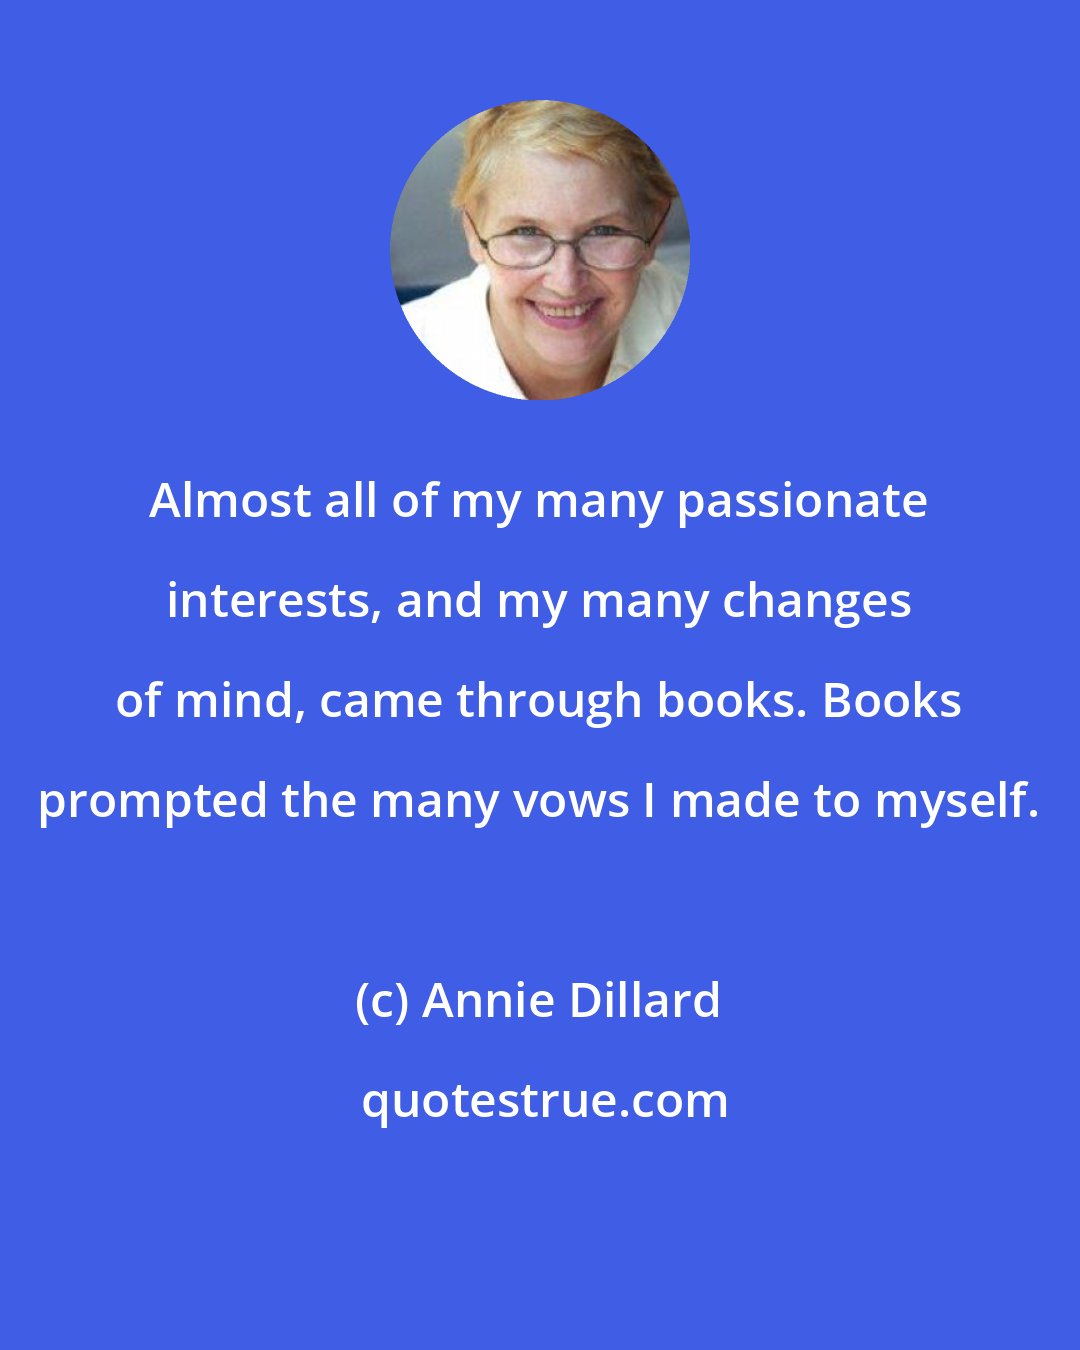 Annie Dillard: Almost all of my many passionate interests, and my many changes of mind, came through books. Books prompted the many vows I made to myself.